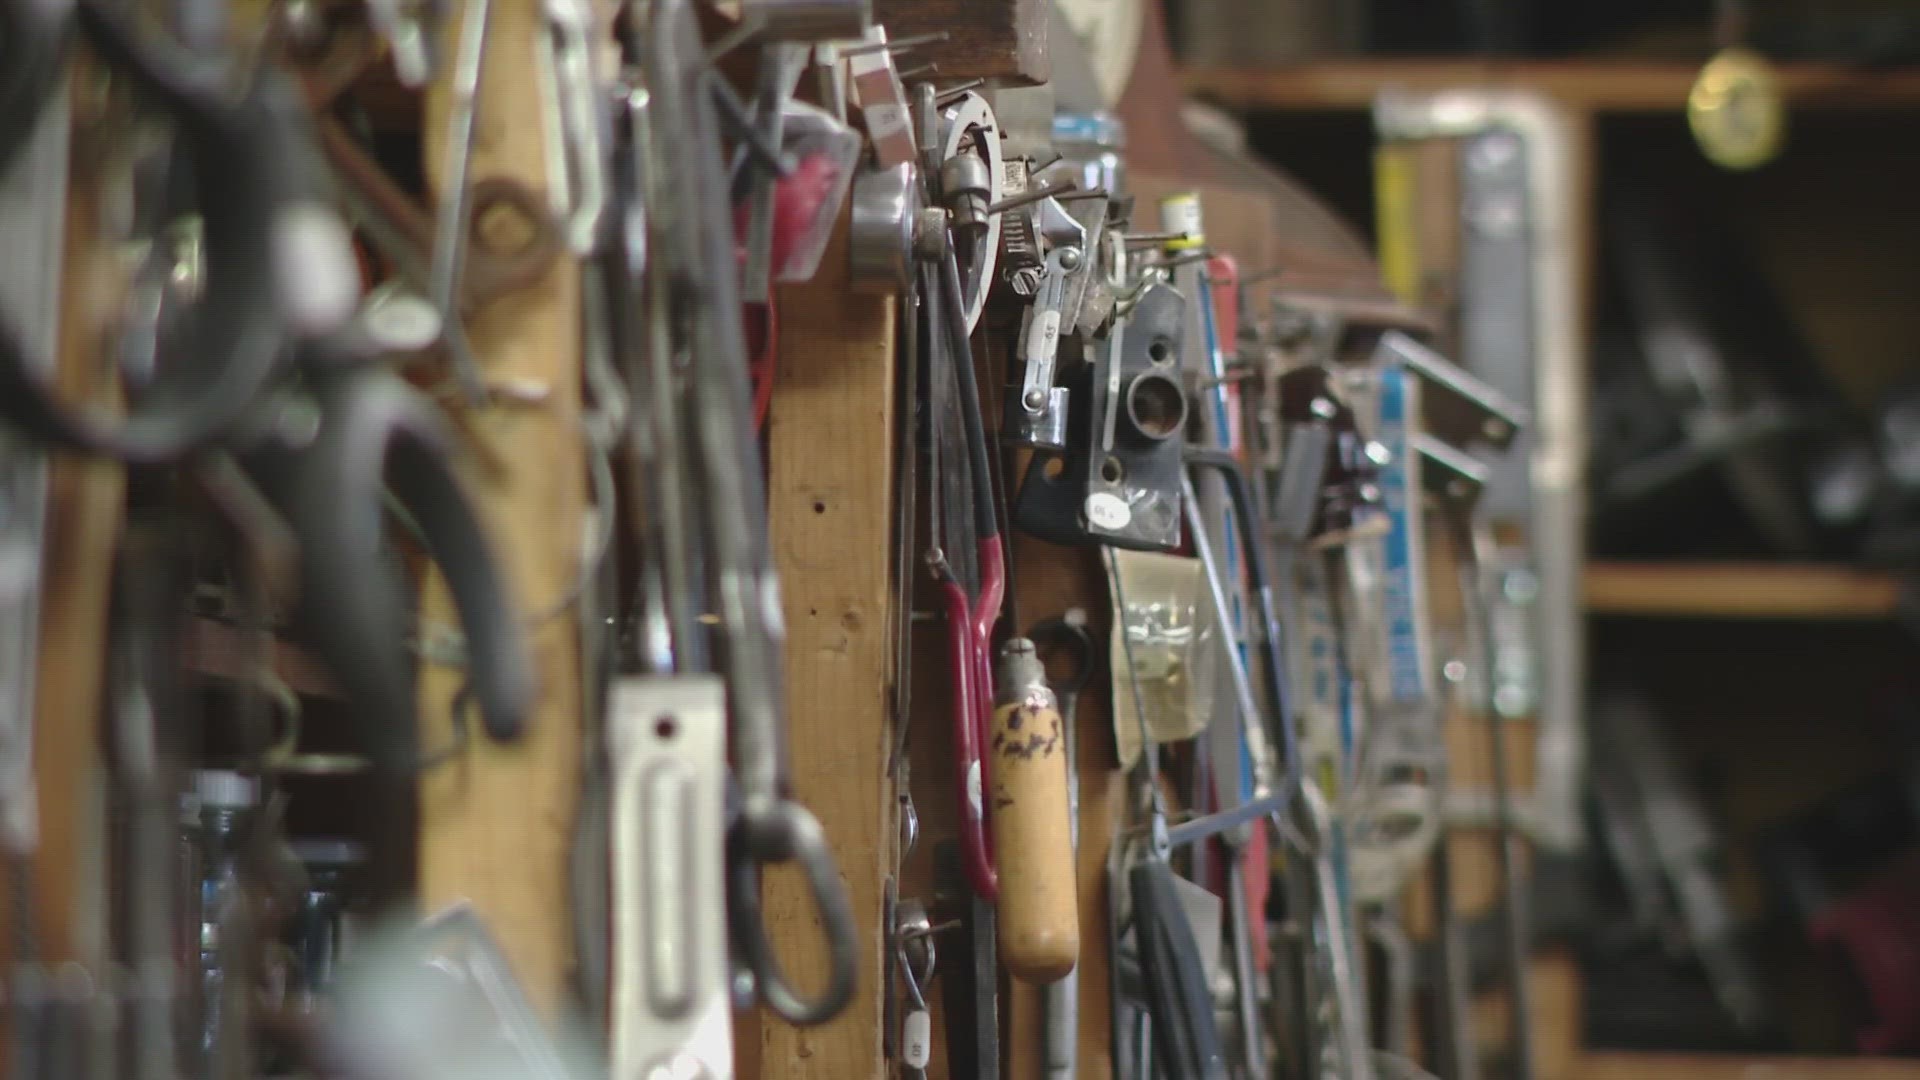 Liberty Tool Co. has tools dating back two centuries that are an interest to both carpenters and collectors.